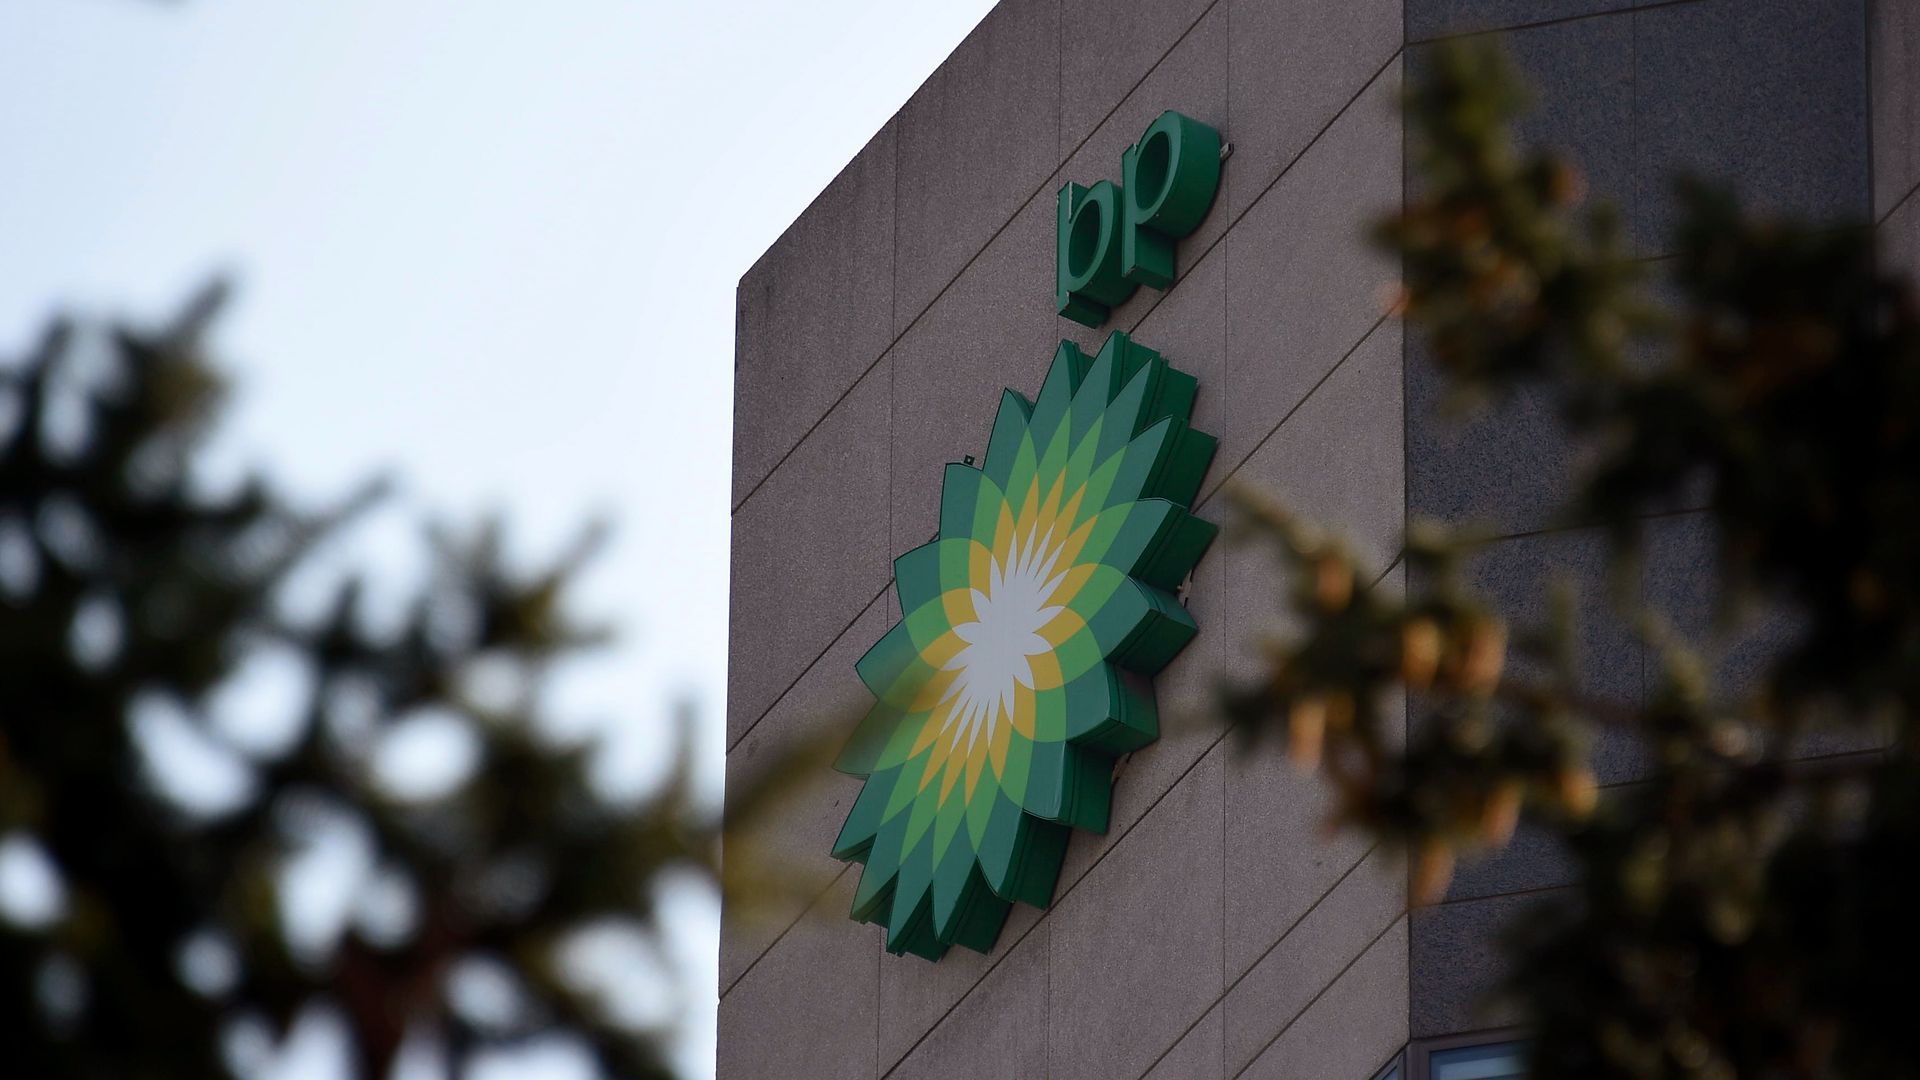 Picture of BP logo against a building